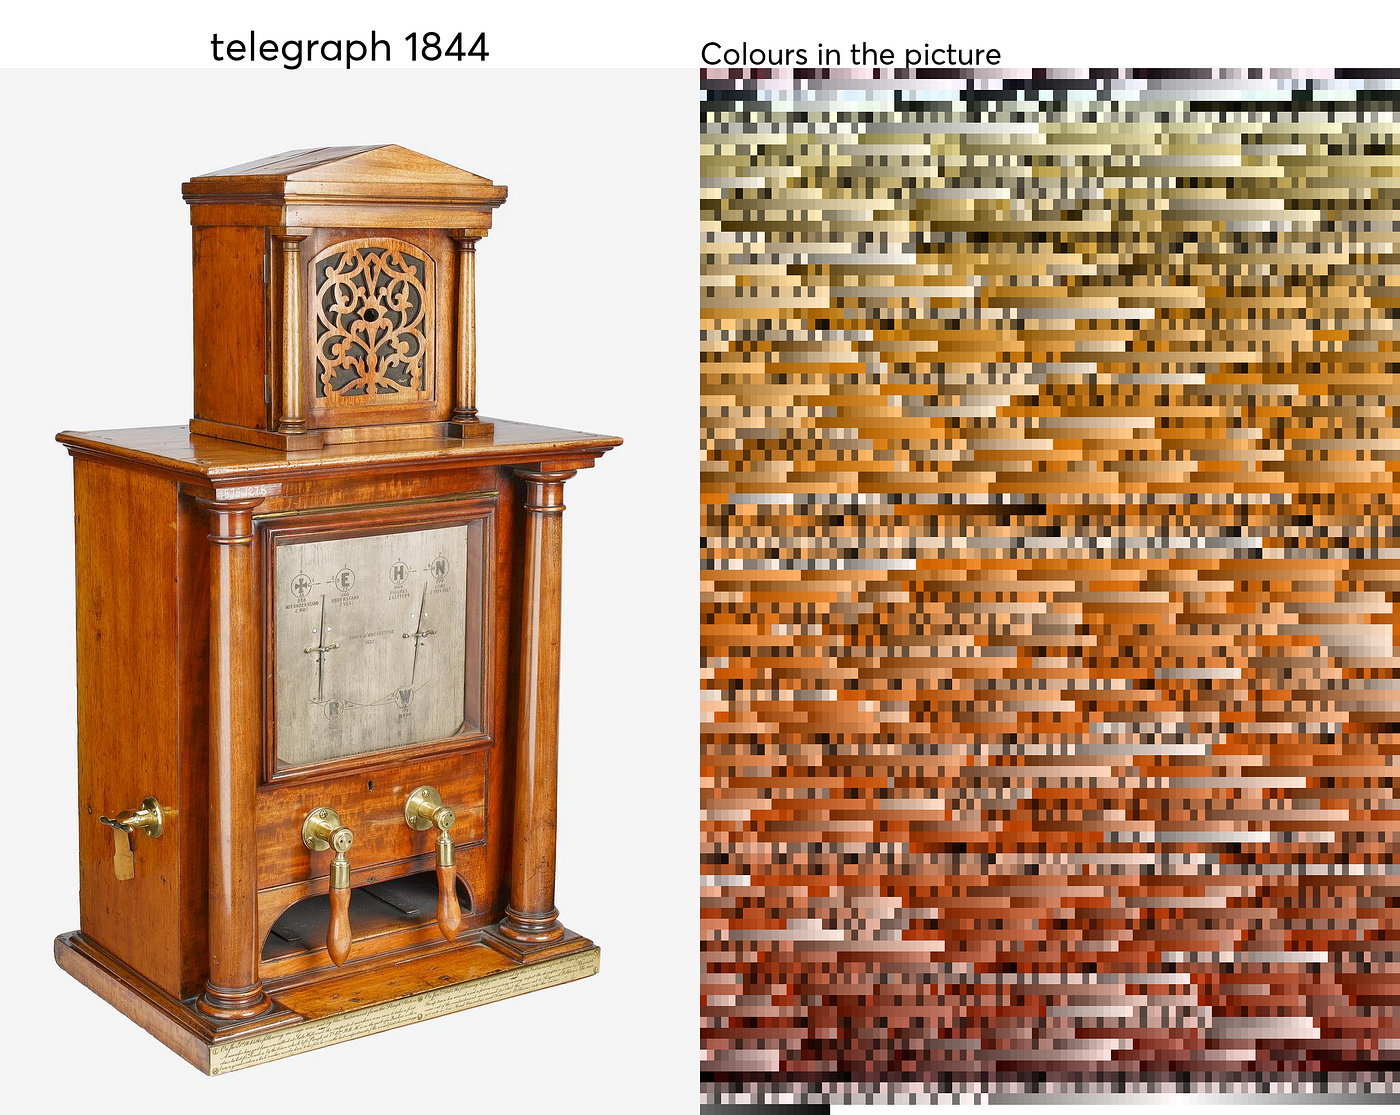 Images of wooden telegraph and it’s analytics breakdown of colors.